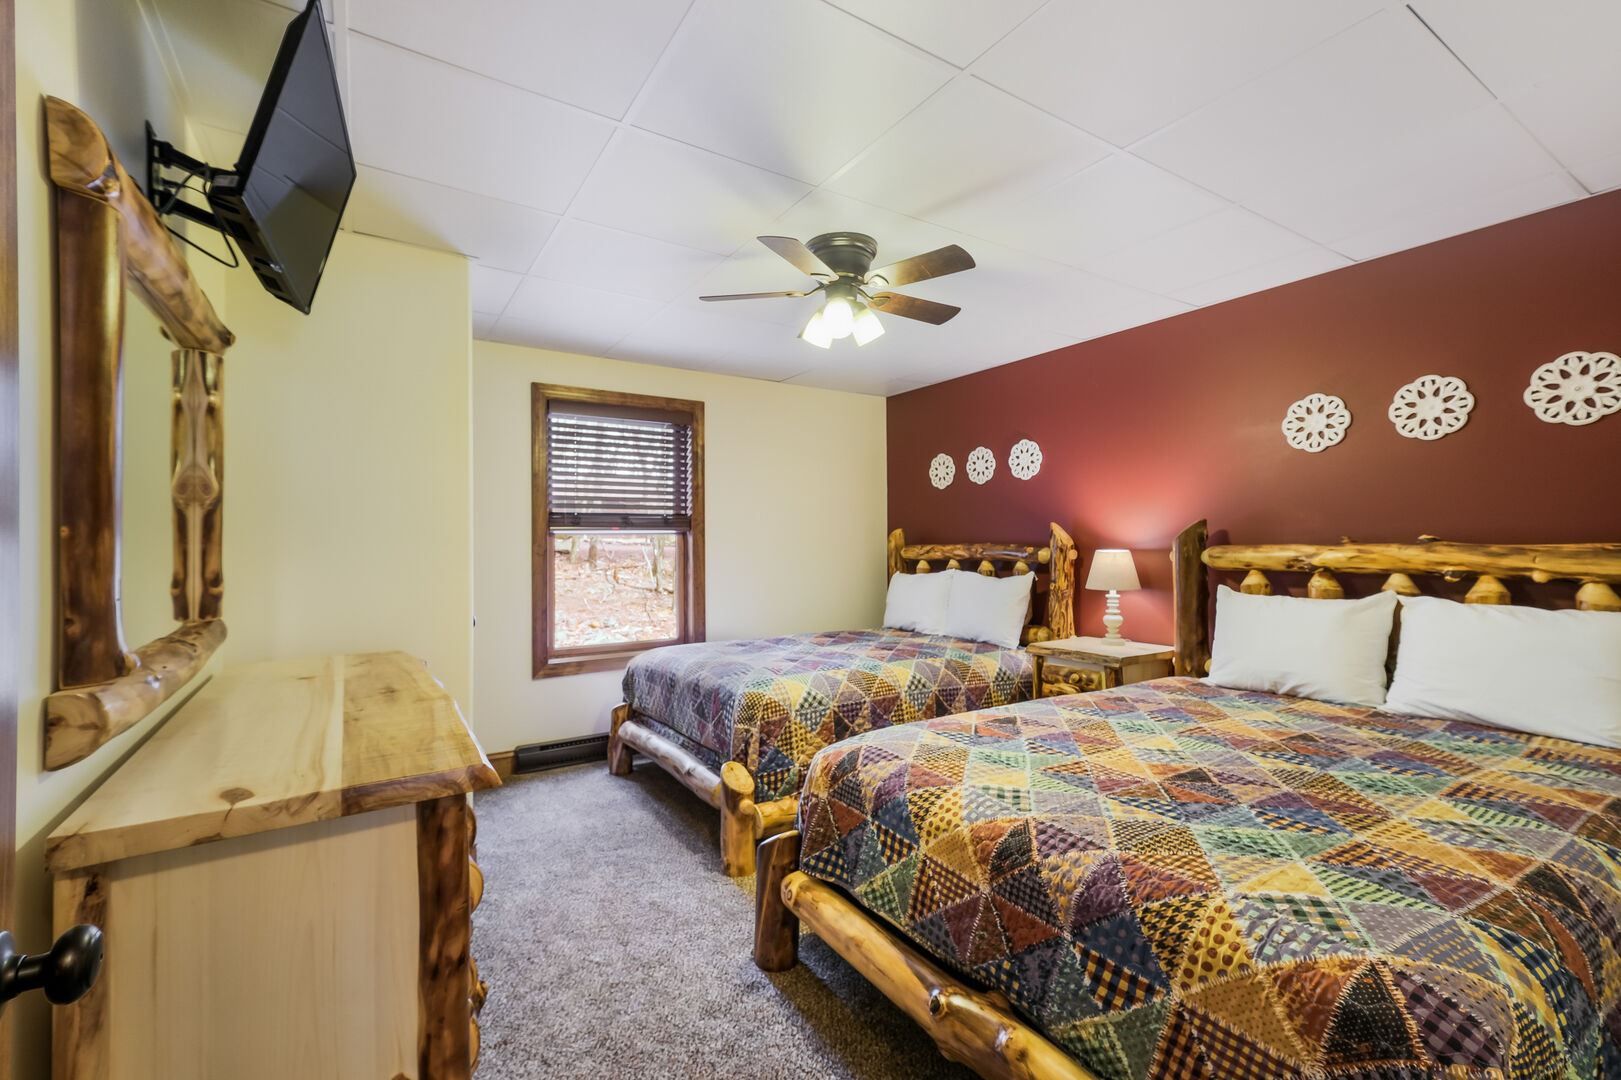 Bedroom with Two Beds, Ceiling Fan and Mounted TV